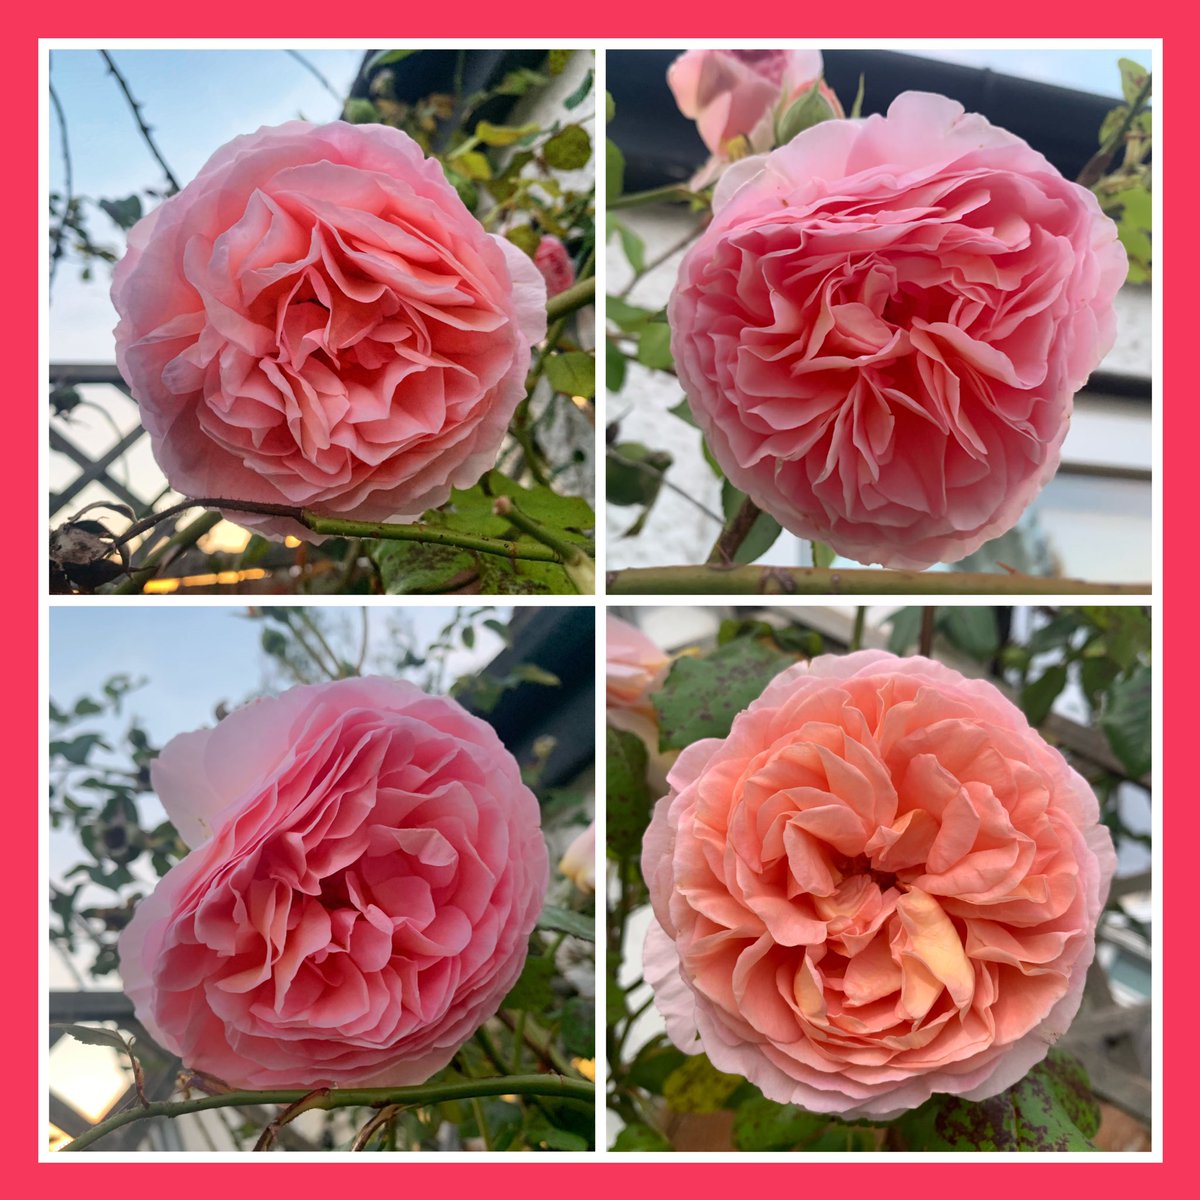 Have a lovely day everyone, may you find it filled with love and kindness 🥰 The roses on my own patio are still giving a fantastic display 😊 I think the #UKHeatwave has come to an end but still a gorgeous day, perfect for #nakedgardening #GardeningX #GardeningTwitter #roses